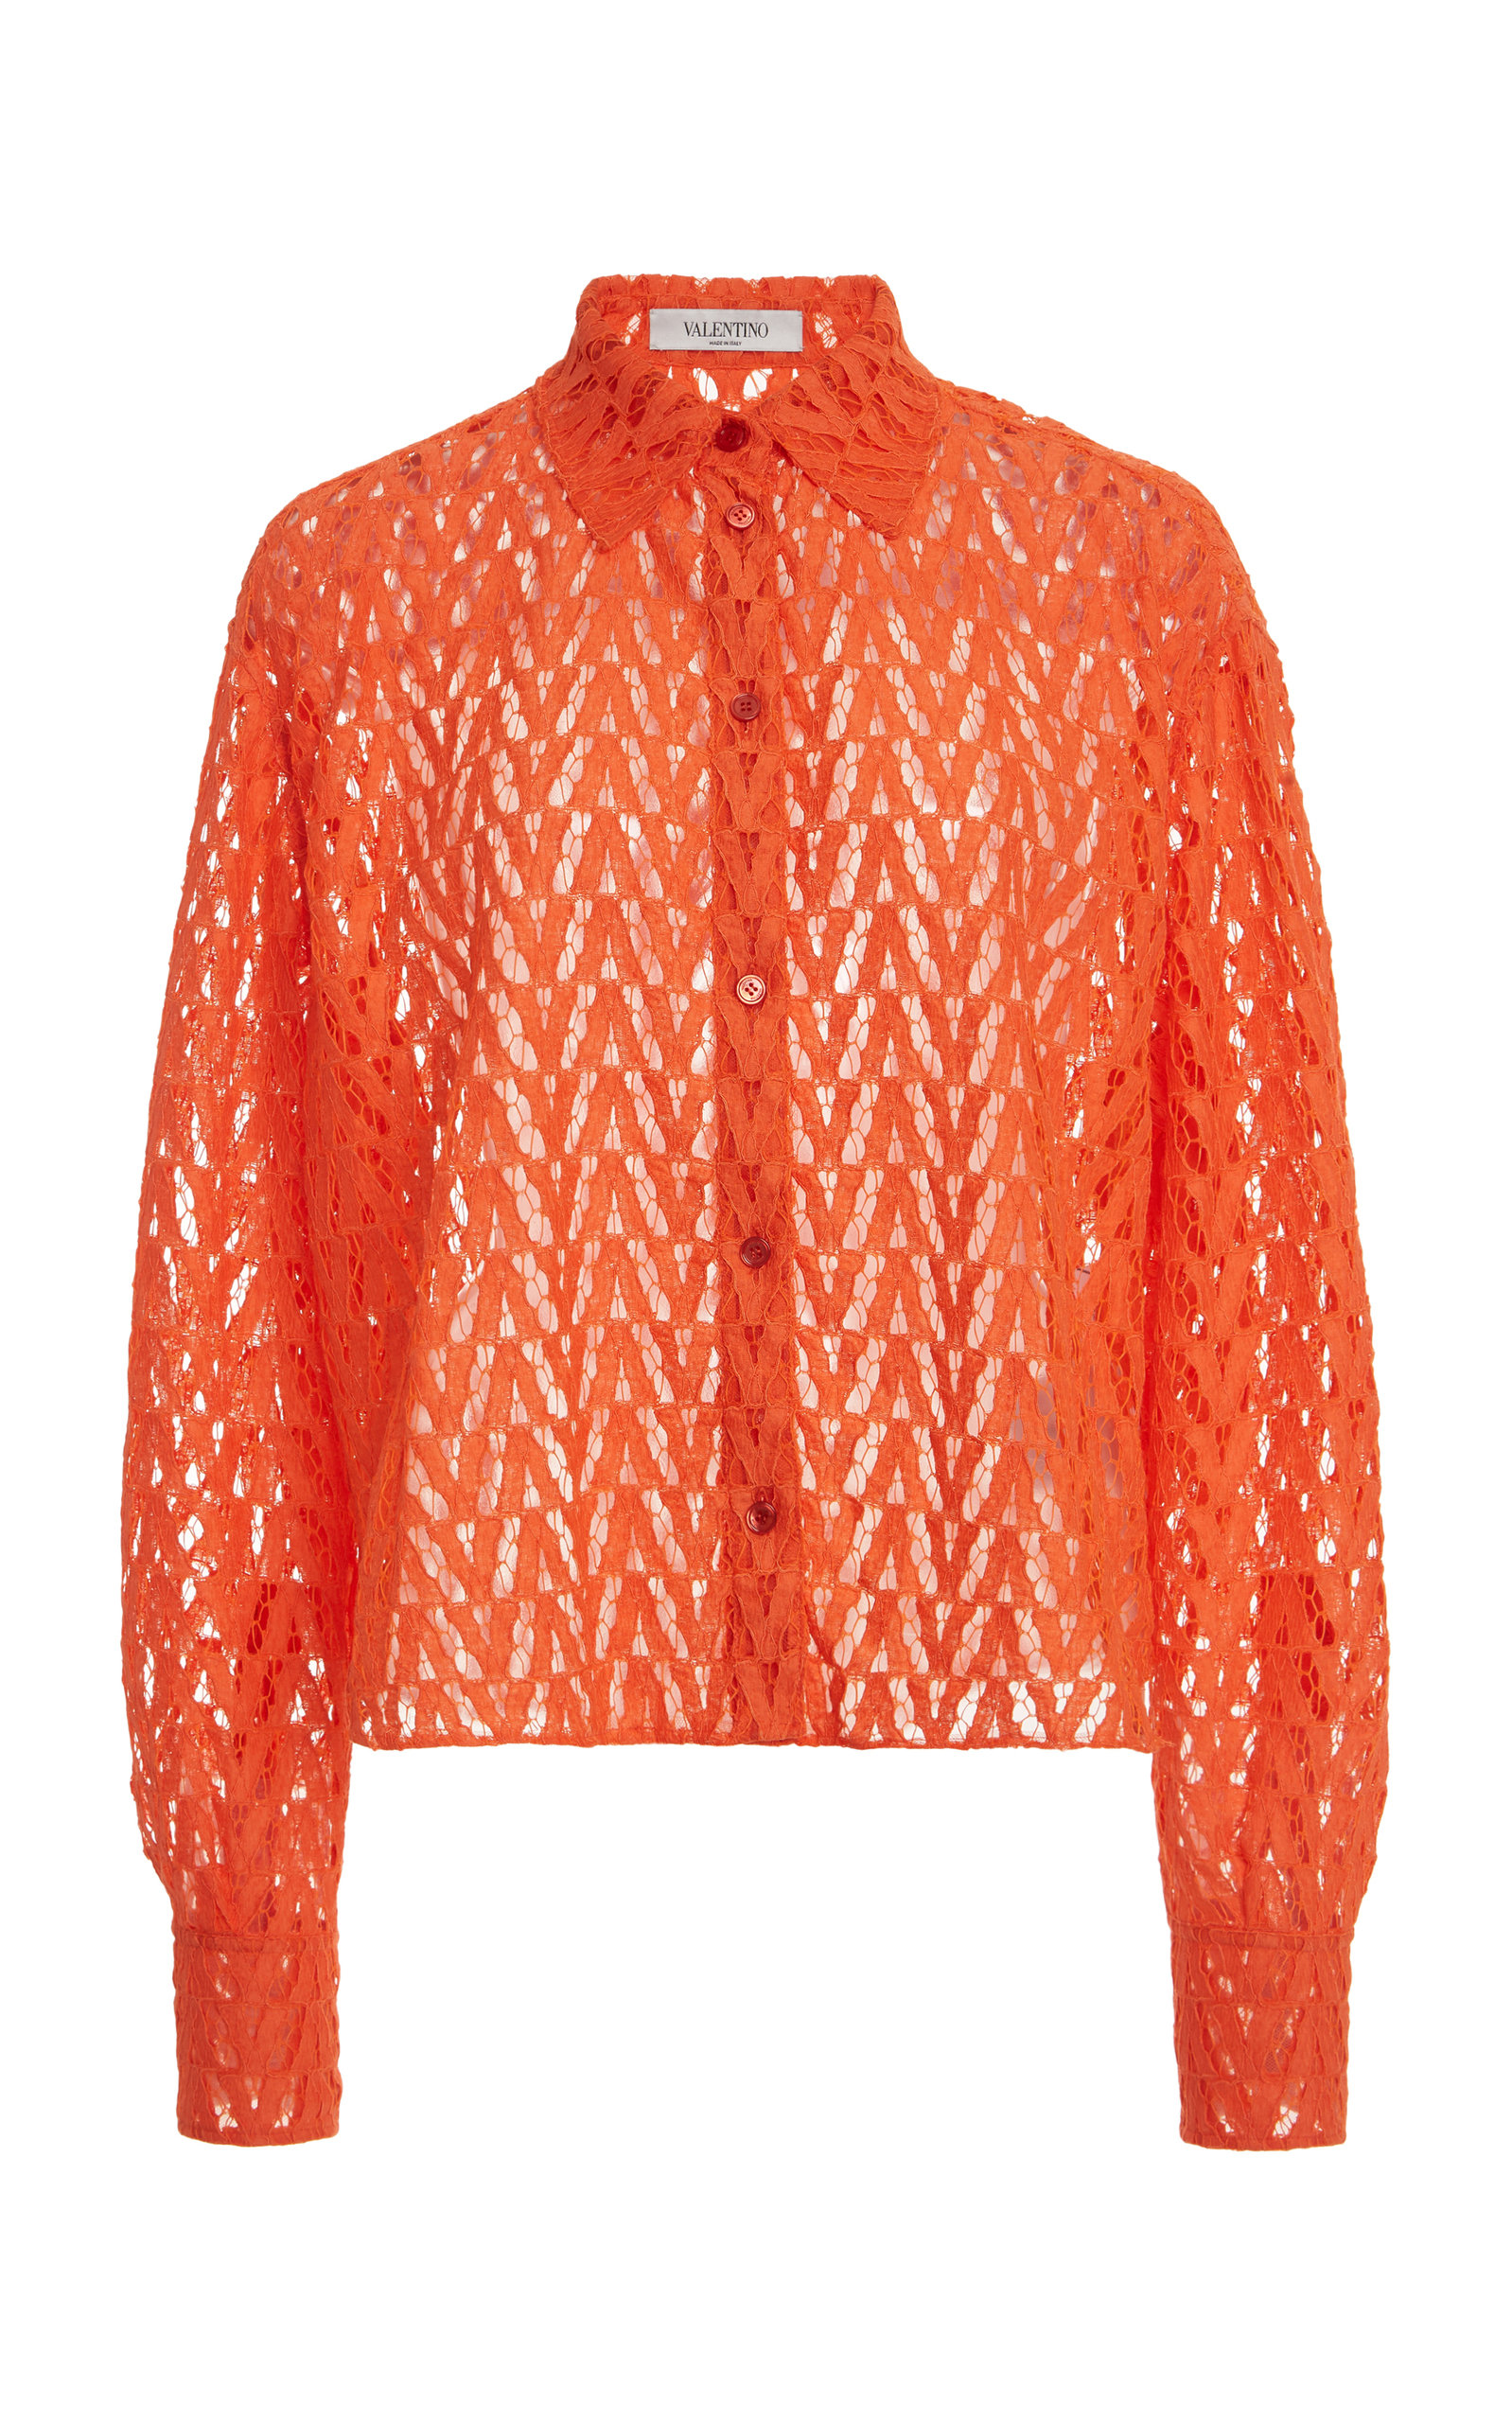 Valentino Women's Button-Up Lace Shirt